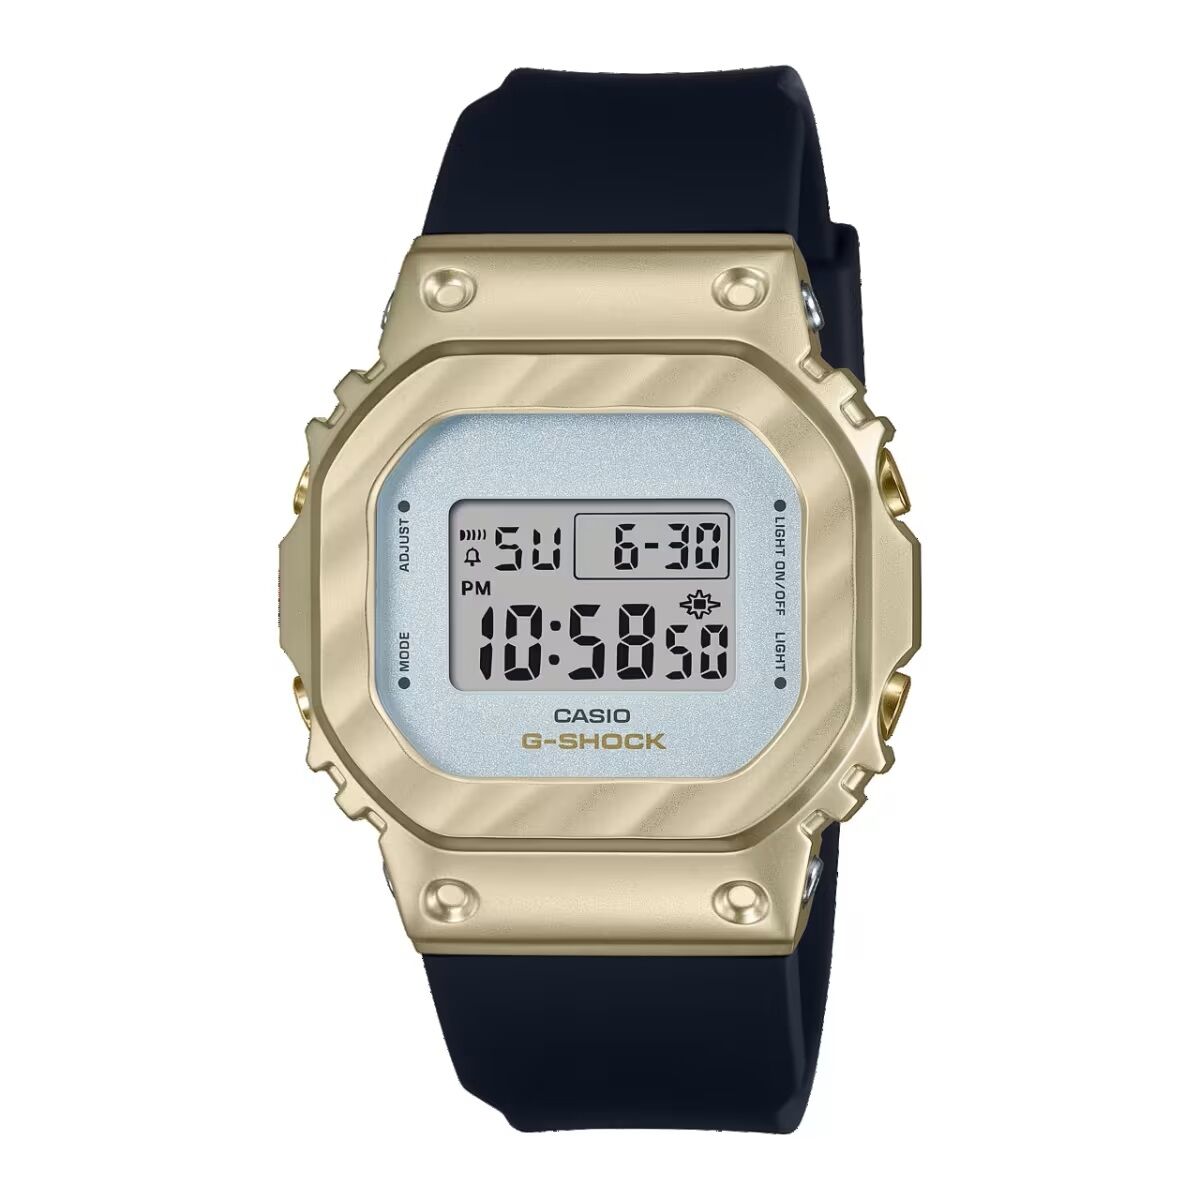 Montre Femme Casio G-Shock OAK METAL COVERED COMPACT - BELLE COURBE SERIE (Ø 38 mm)